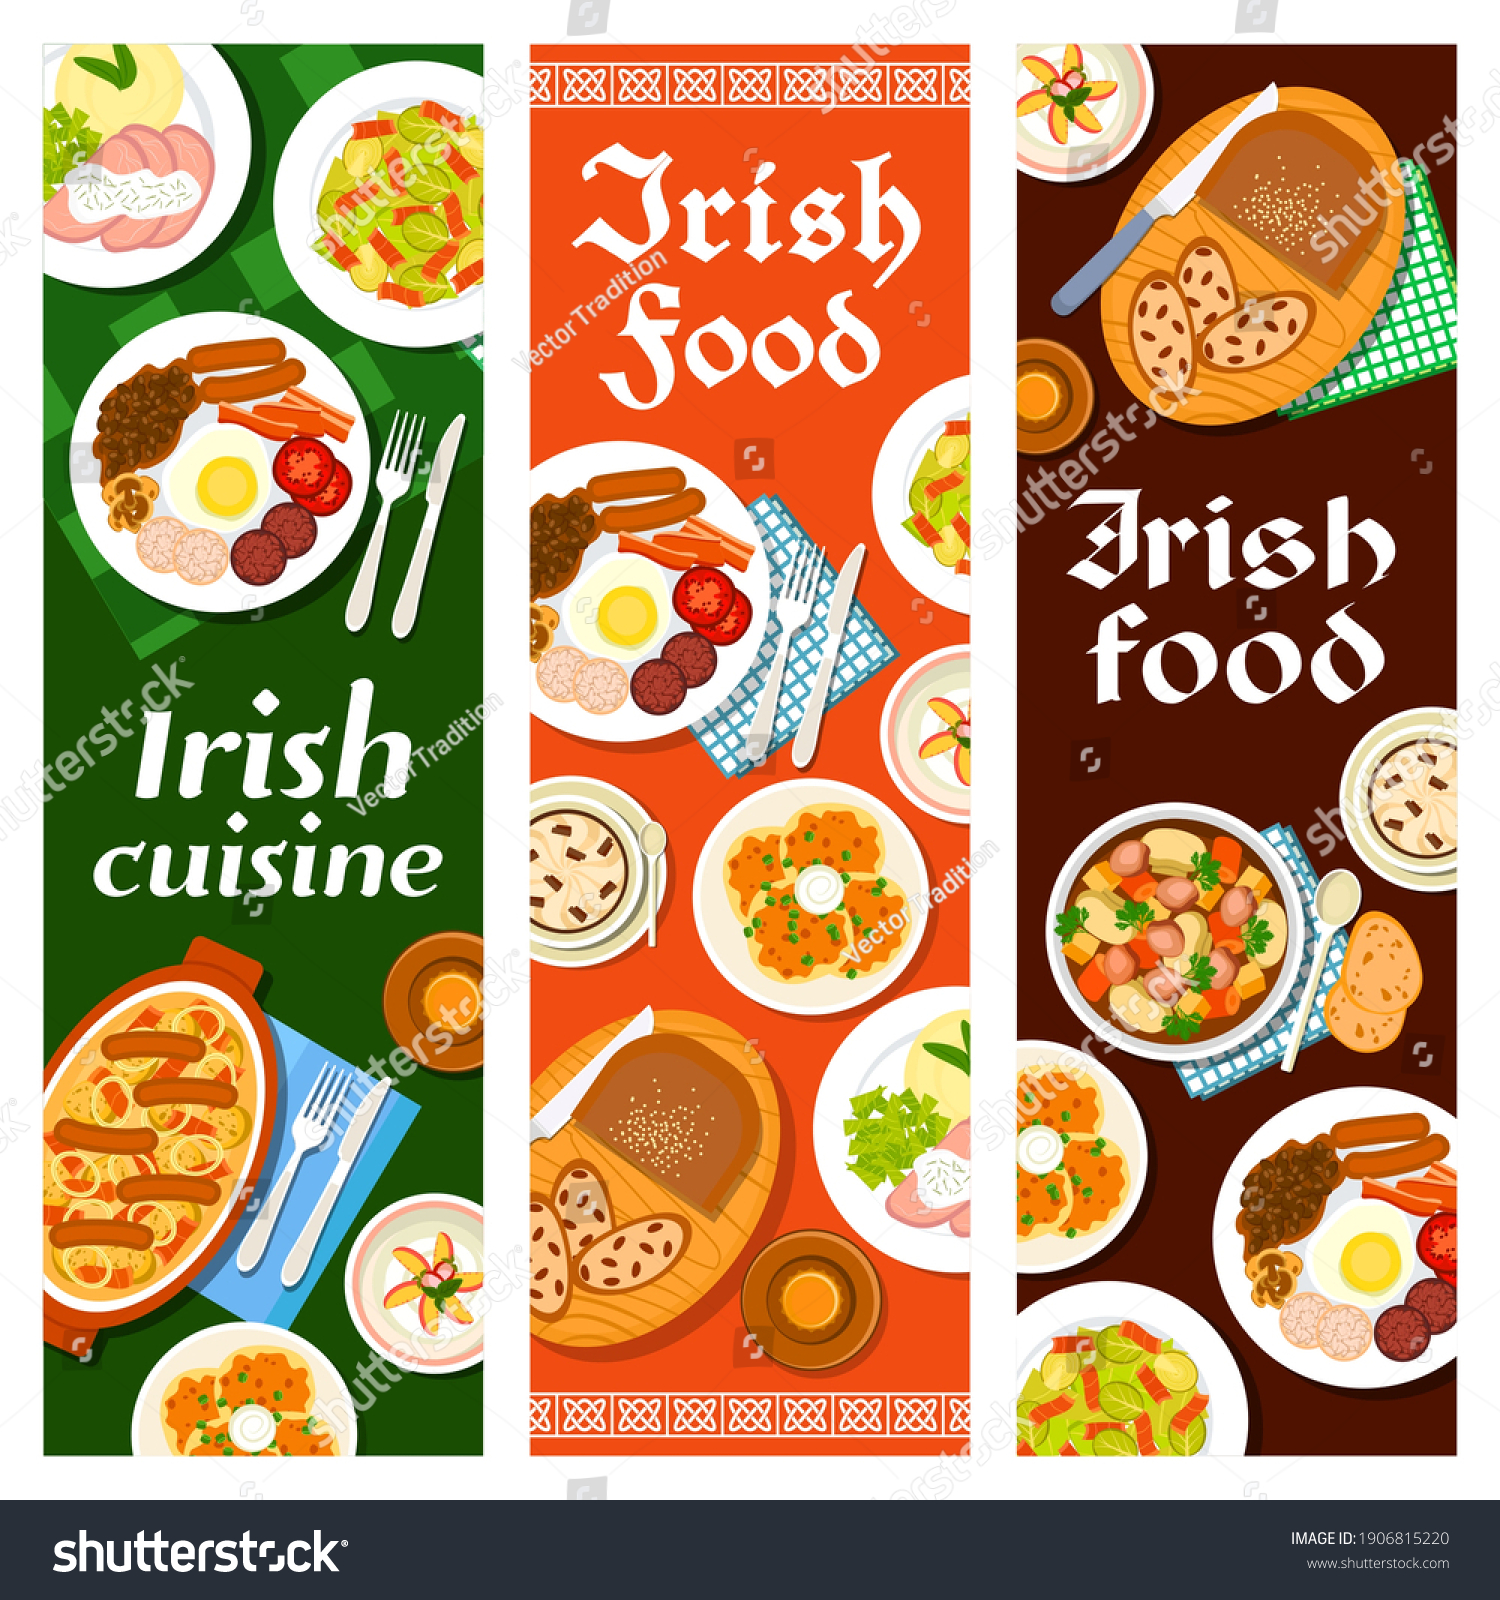 SVG of Irish food cuisine, breakfast menu and Ireland dishes, vector banners with bread raisin, pudding and beef stew. Irish cuisine restaurant menu food lunch Dublin coddle, Brussels sprouts and bacon salad svg